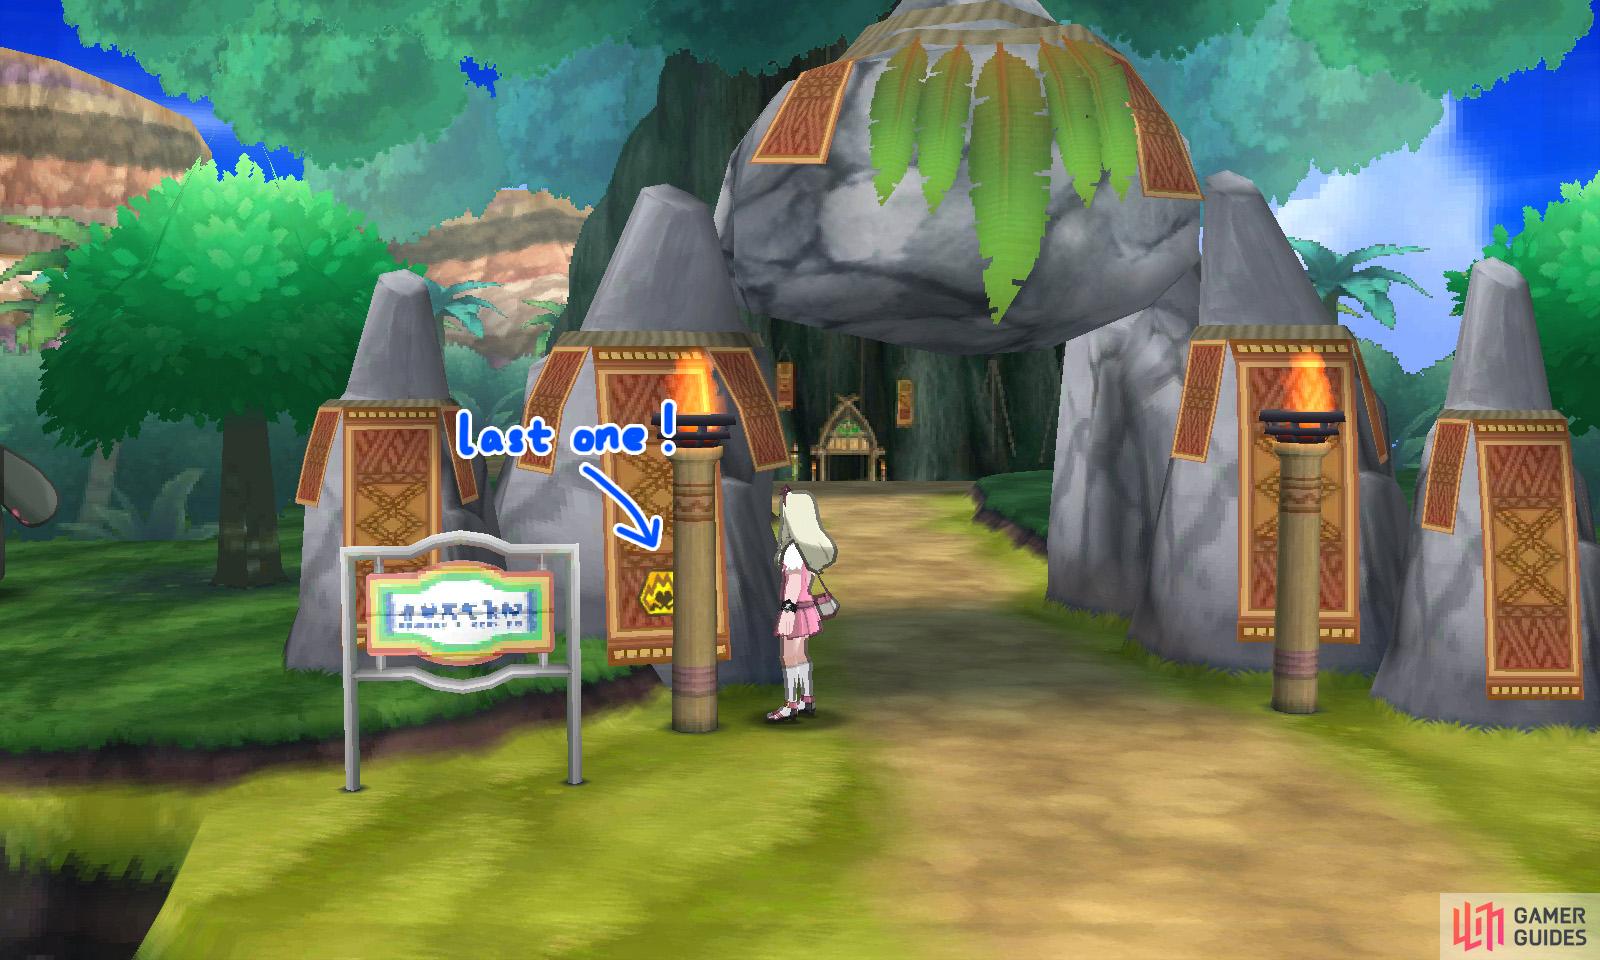 100: To the left of the Battle Tree entrance.